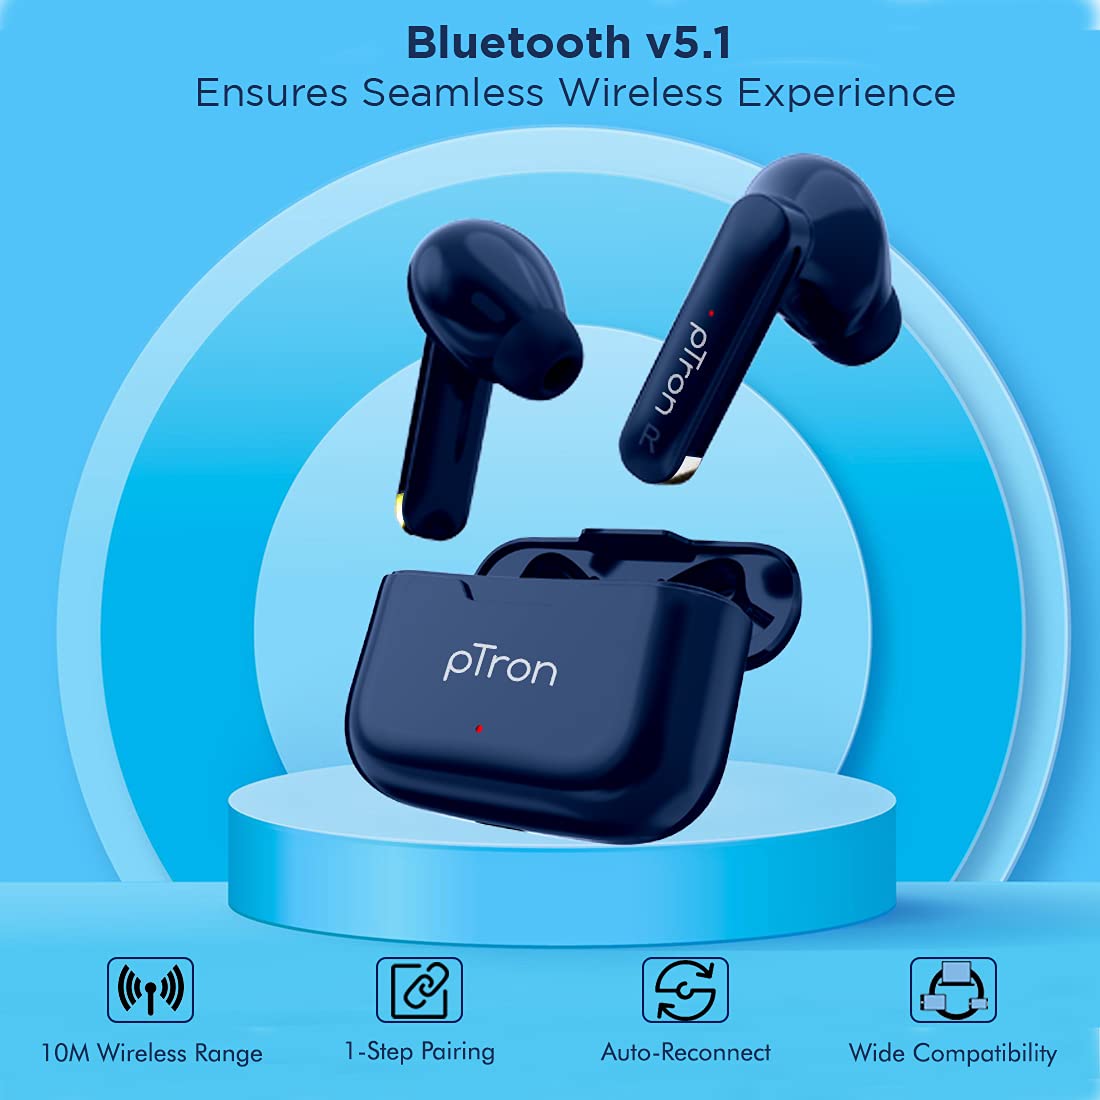 pTron Bassbuds Duo New Bluetooth 5.1 Wireless Headphone with Stereo Audio, Touch Control TWS, Dual HD Mic, Type-C Fast Charging, IPX4 Water-Resistant, Passive Noise Cancelling & Voice Assistant (Blue)